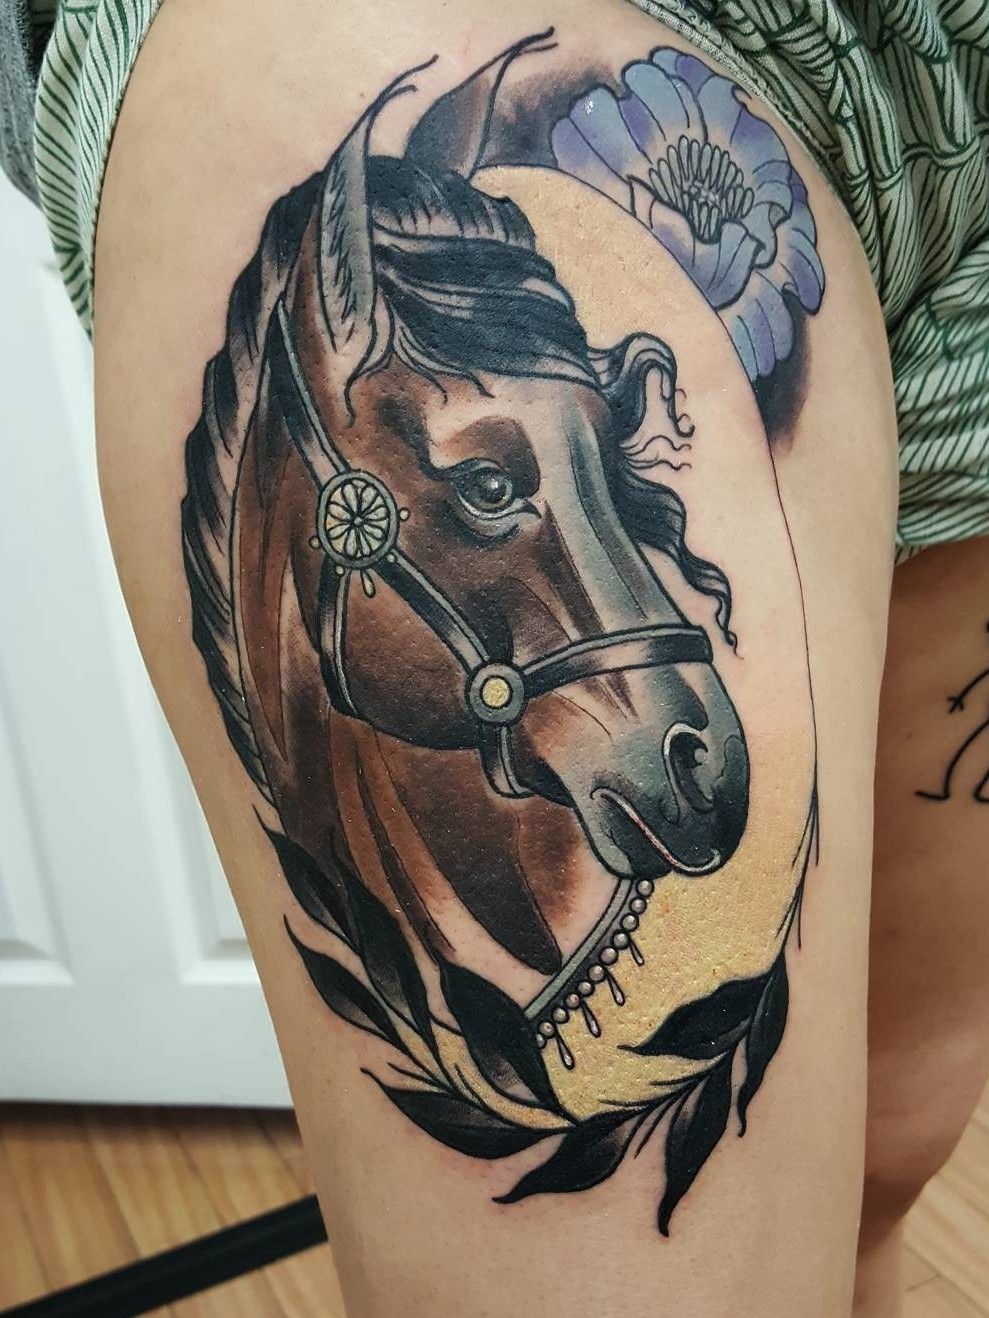 50 Horse Tattoo Ideas for Your Inspiration